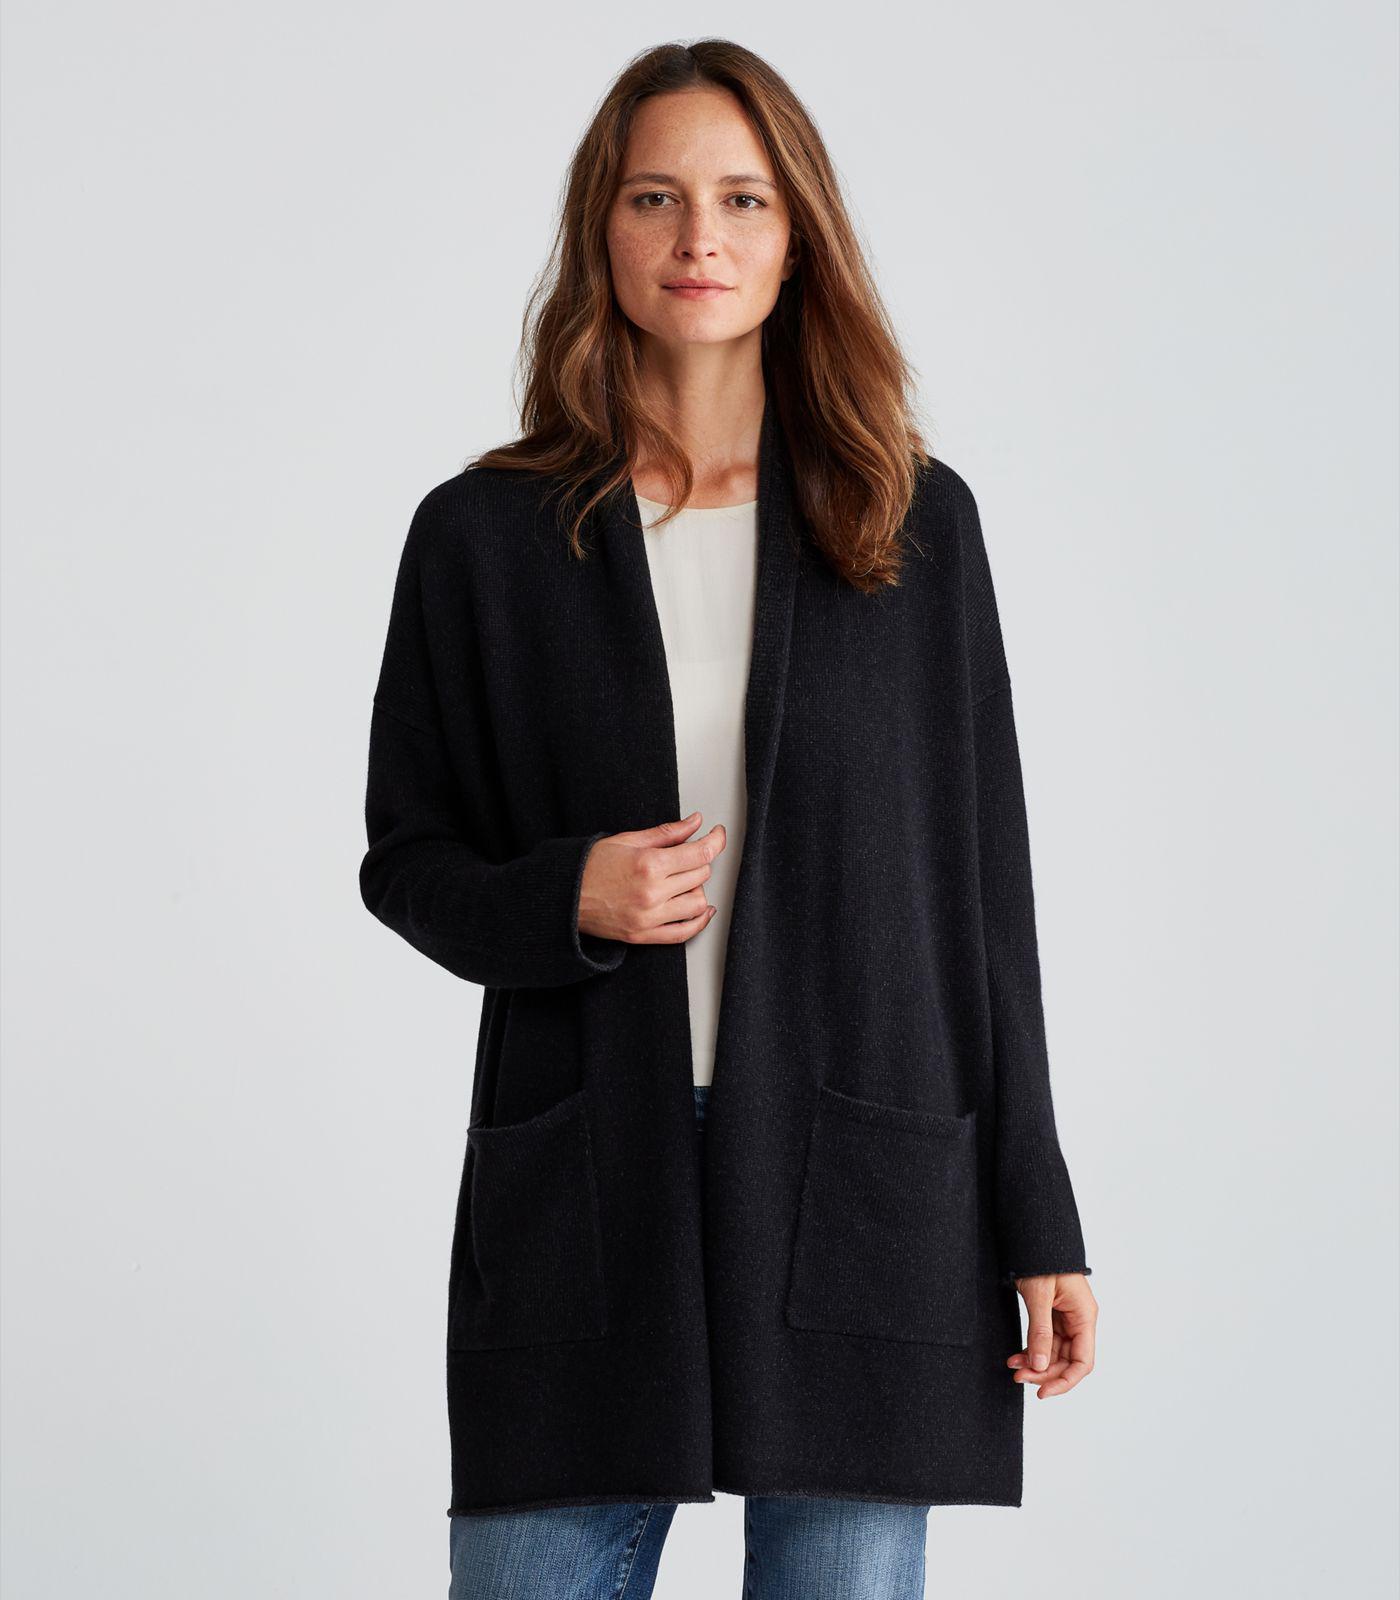 Eileen Fisher Exclusive Lofty Recycled Cashmere Kimono Cardigan in ...